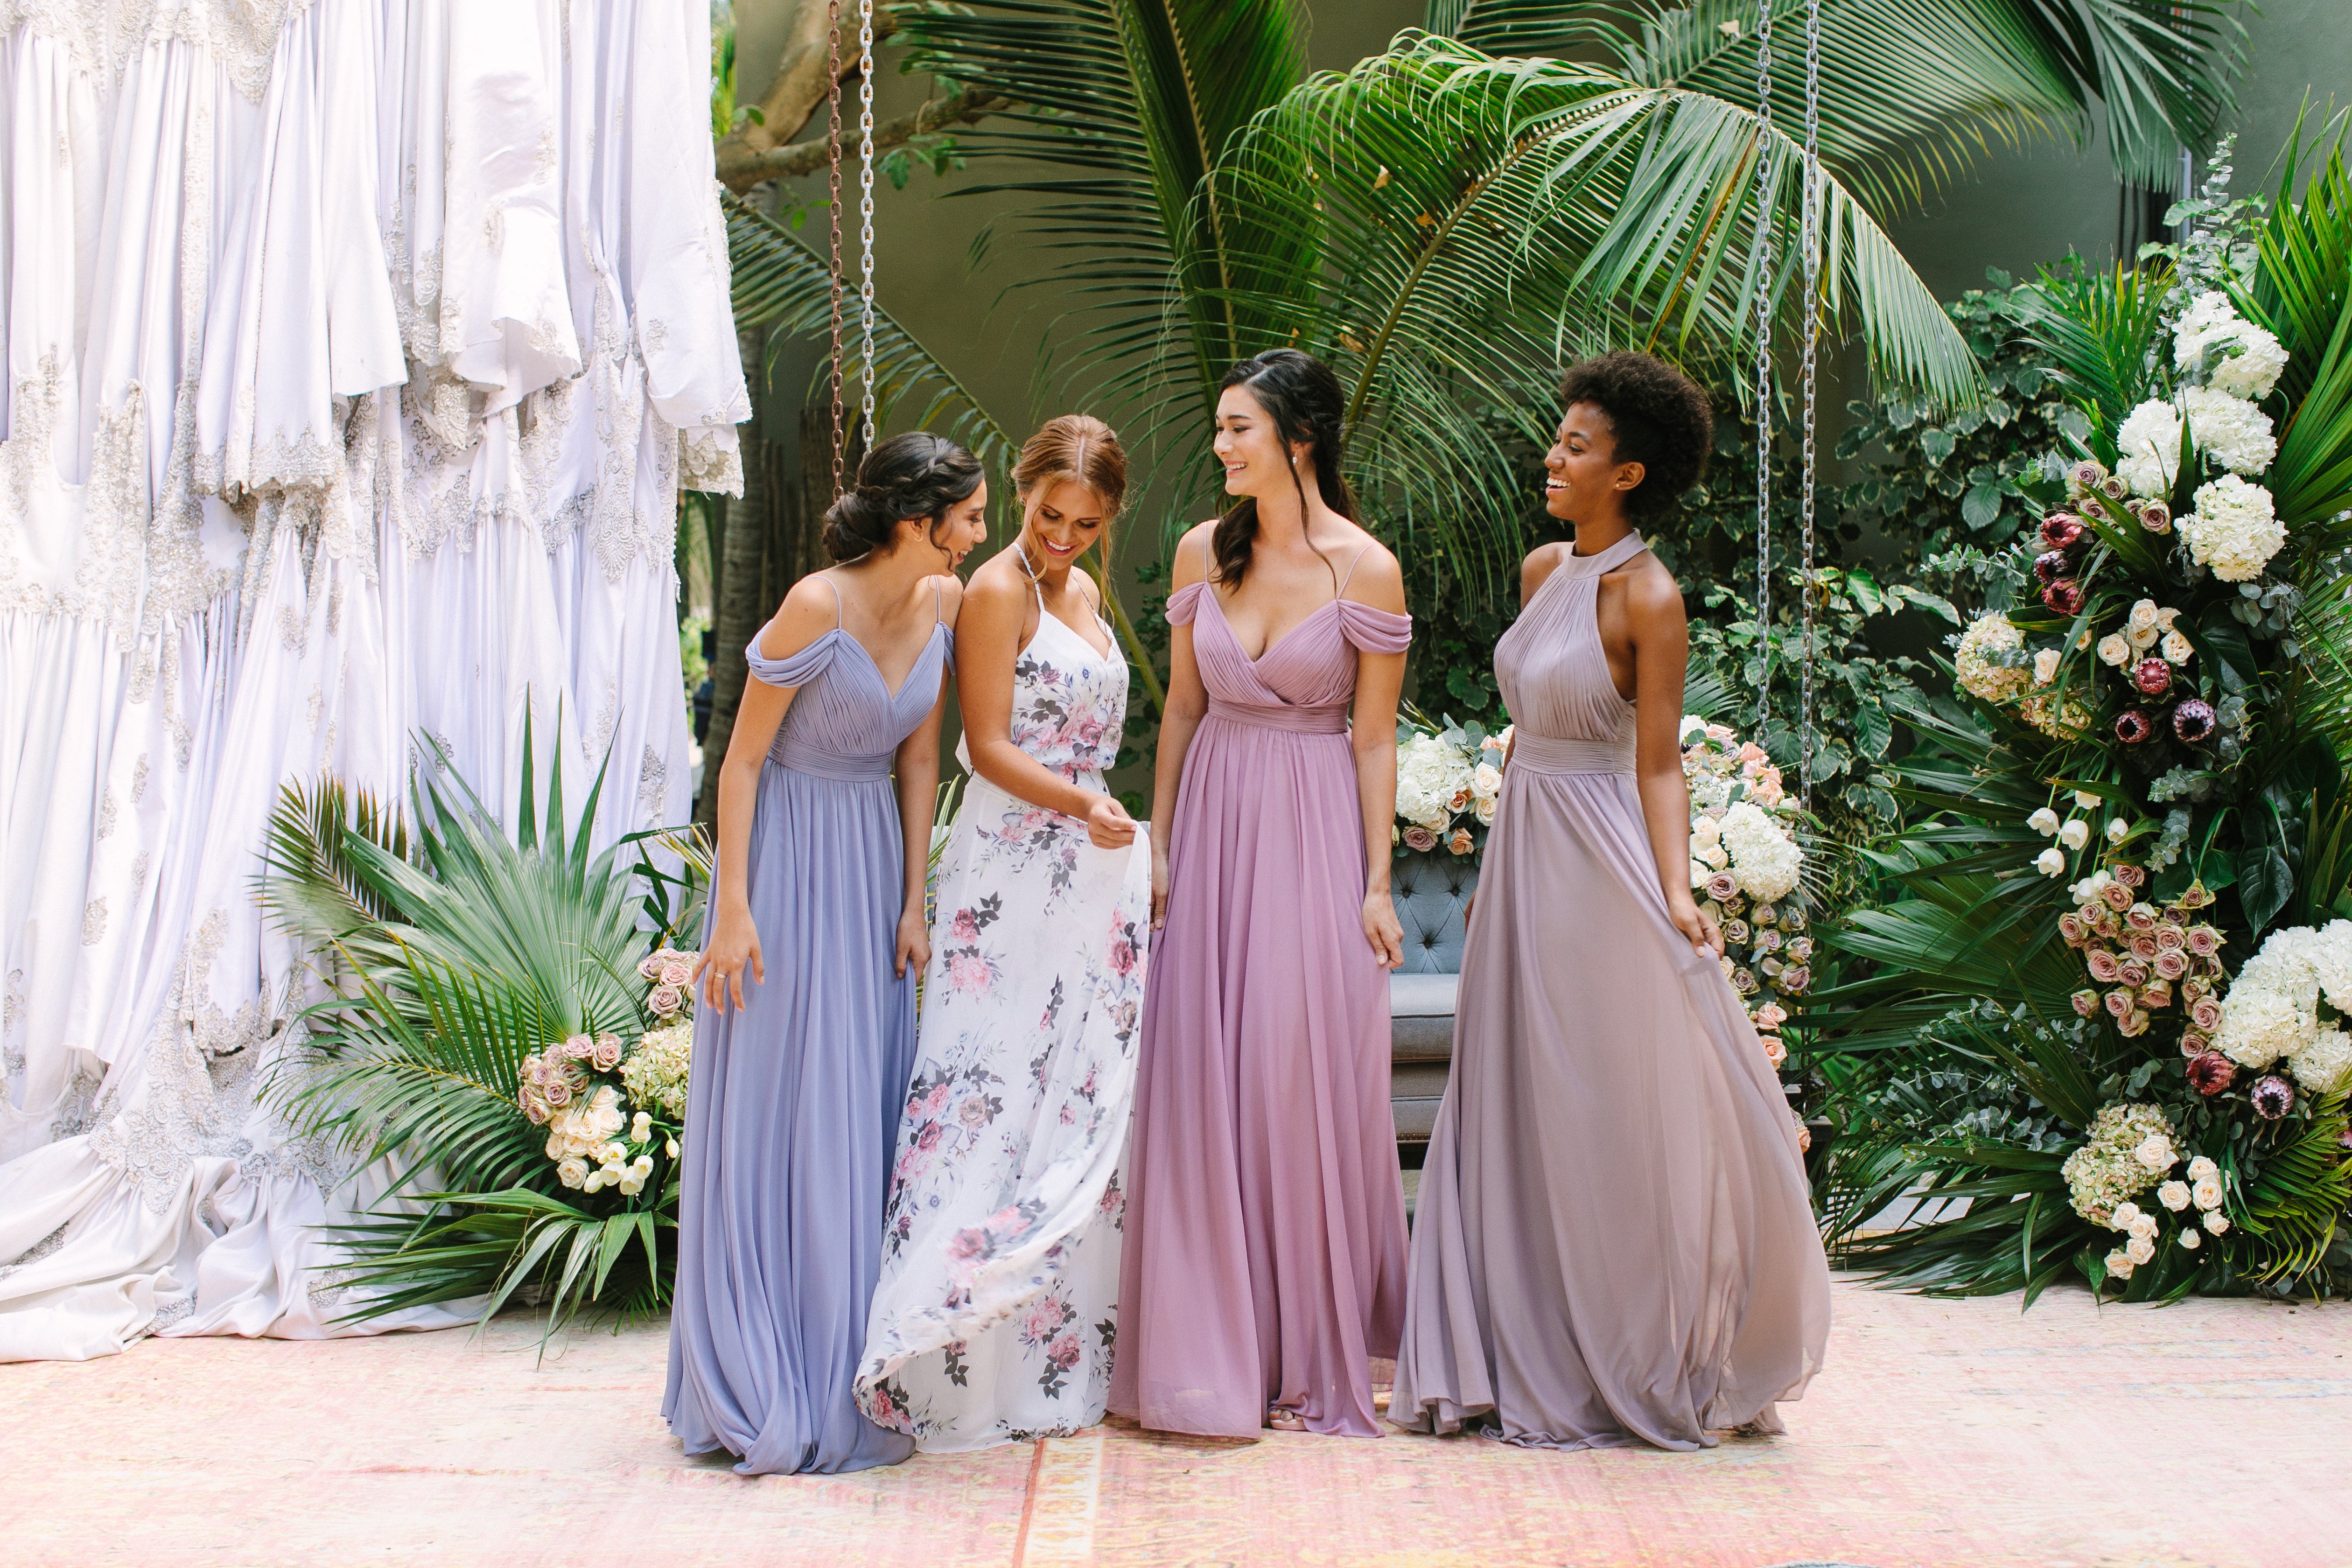 Affordable bridesmaids dresses perfect for destination weddings—We took Kleinfeld Bridal wedding dresses and Kleinfeld Bridal Party bridesmaids dresses to Tulum, Mexico for a fun photoshoot on the beach full of flowers, sun, sand and fun!